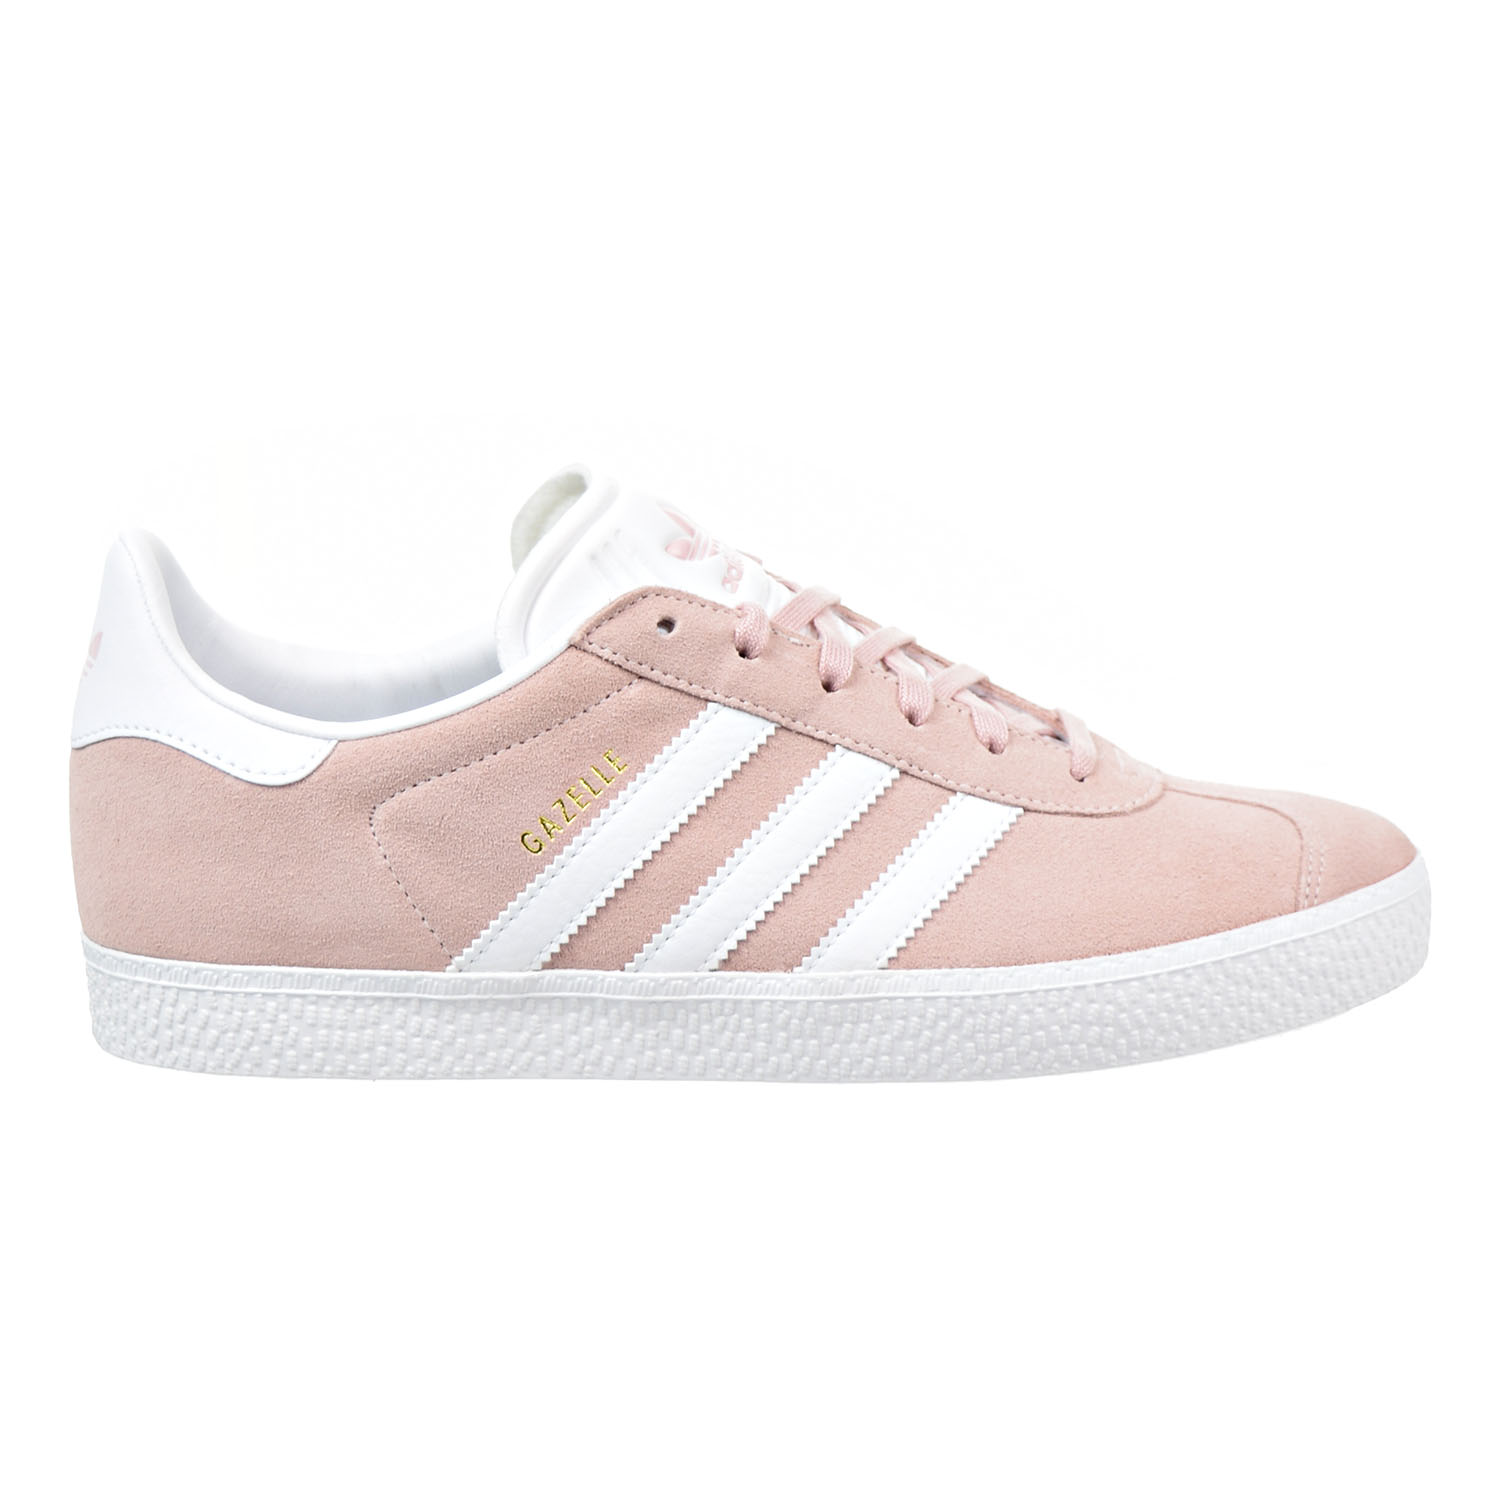 Adidas Gazelle J Big Kids Shoes Ice-Pink/Gold/White by9544